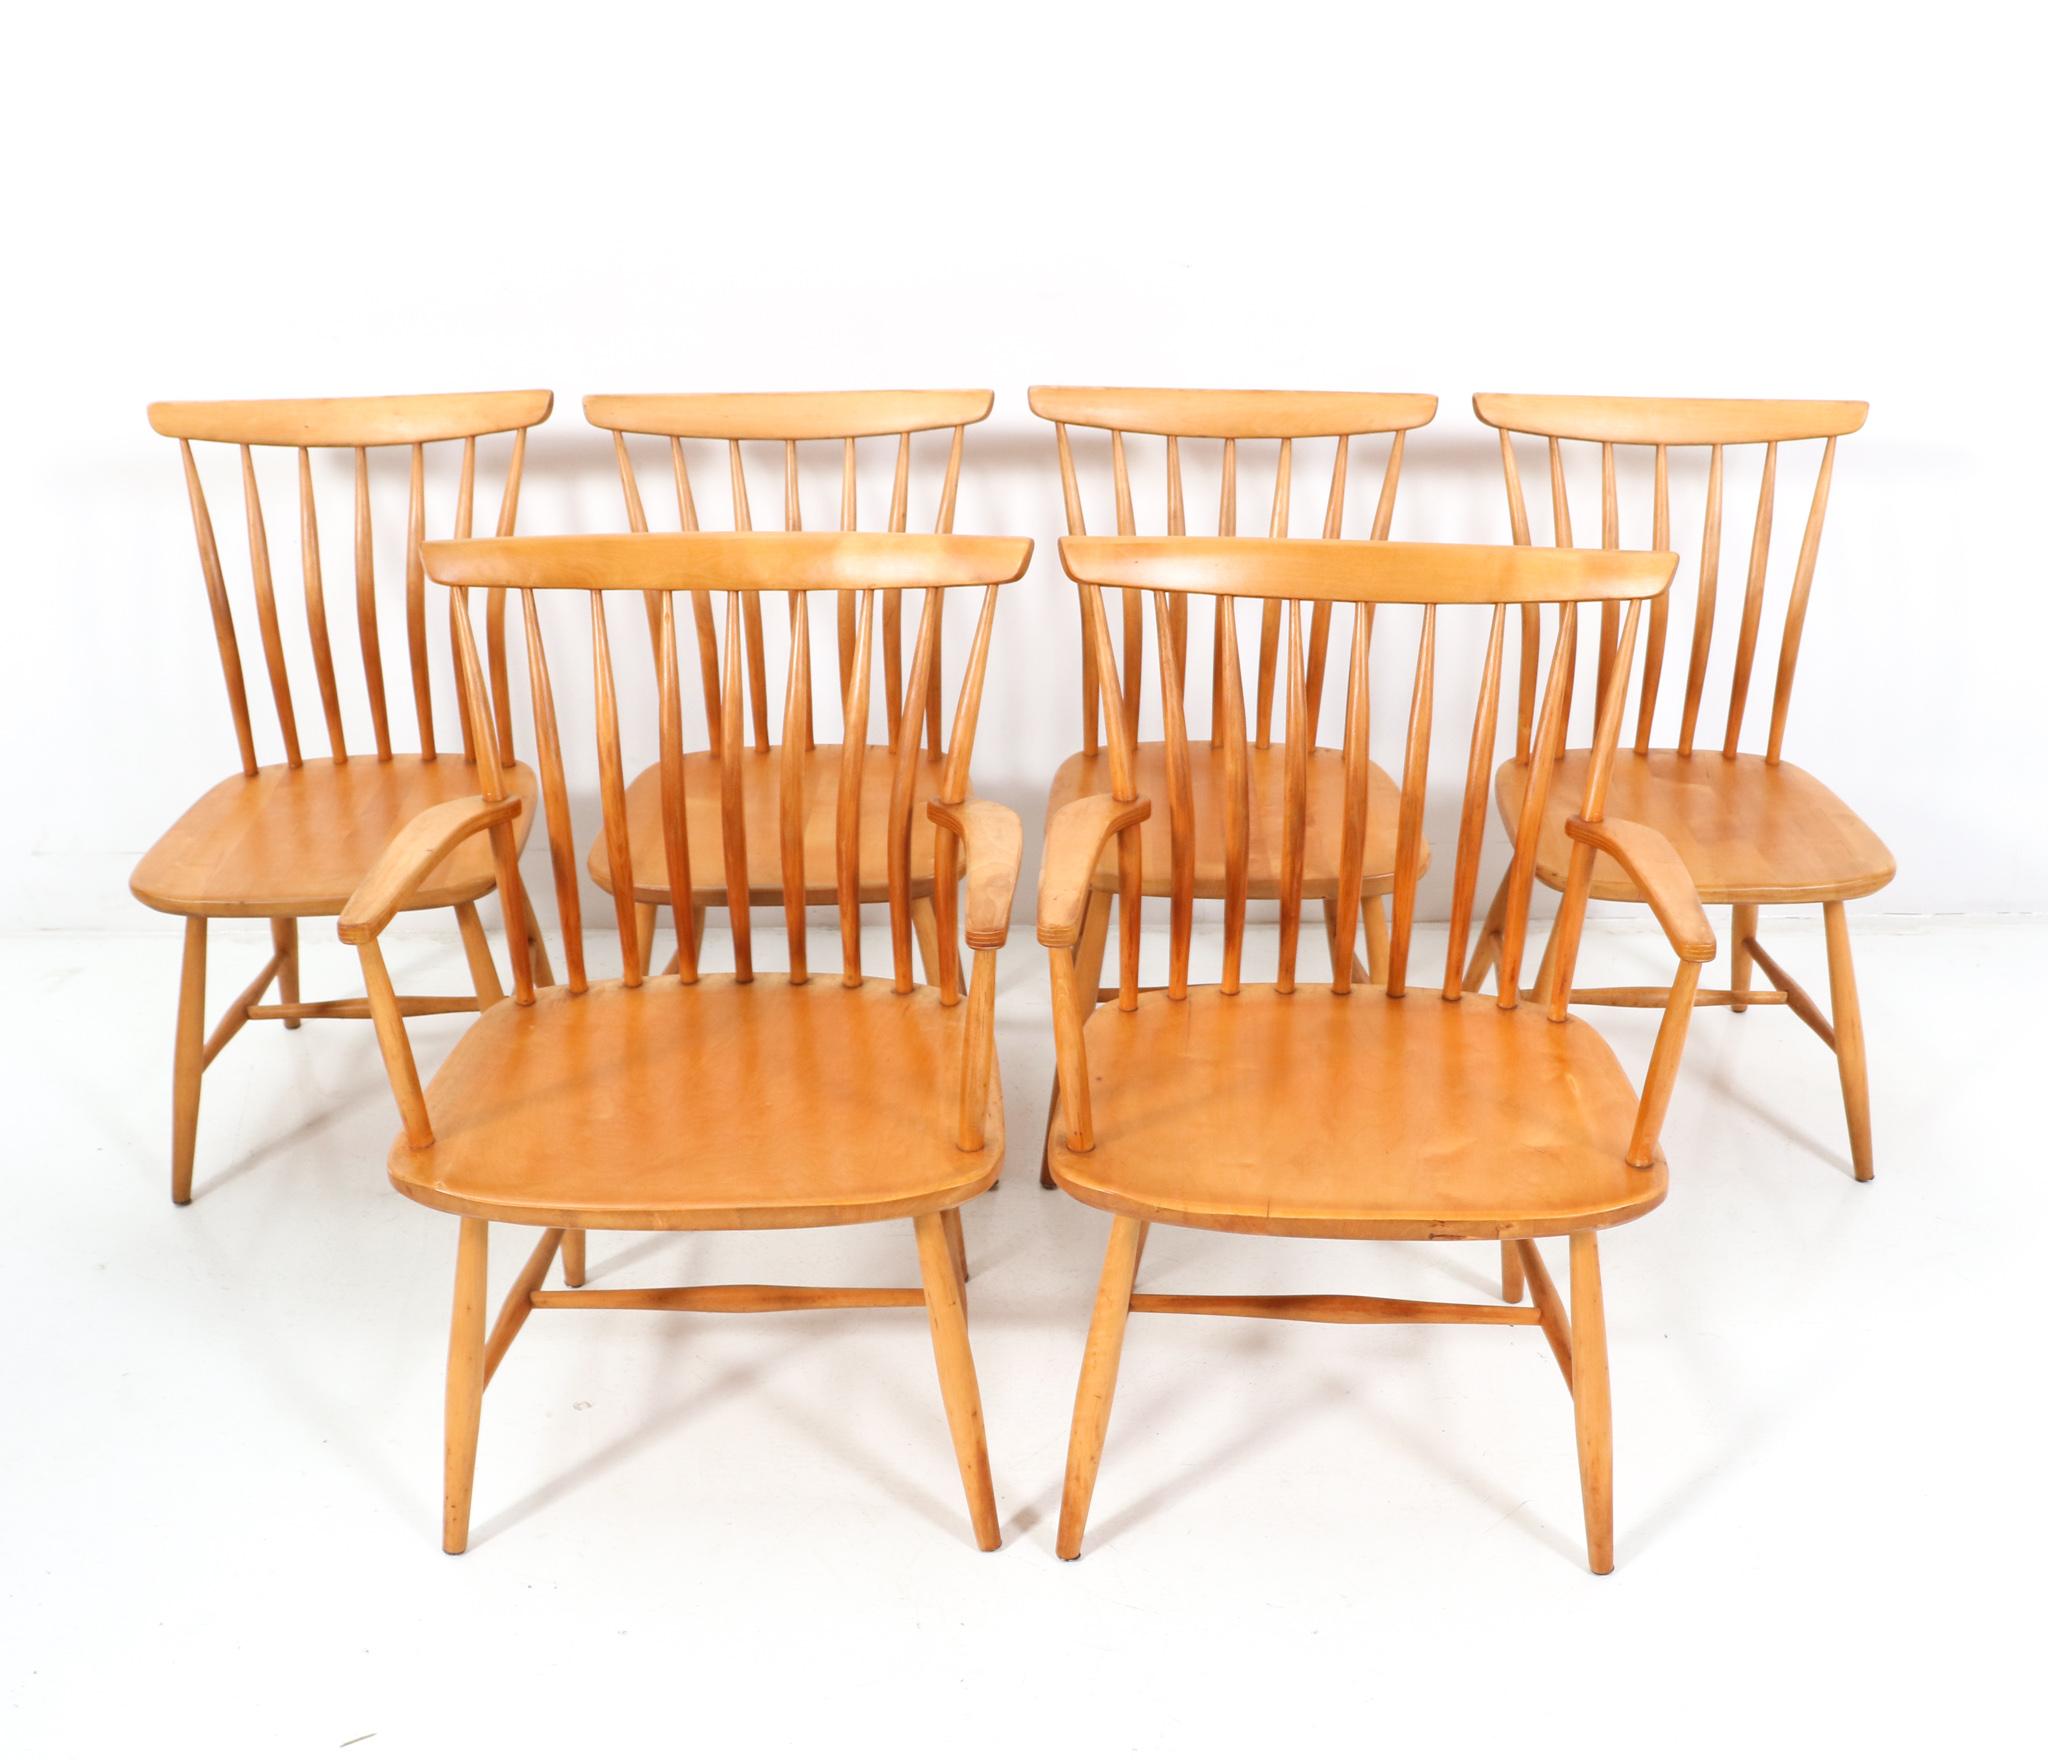 Four Mid-Century Modern Chairs by Bengt Akerblom & Gunnar Eklöf for Akerblom In Good Condition For Sale In Amsterdam, NL